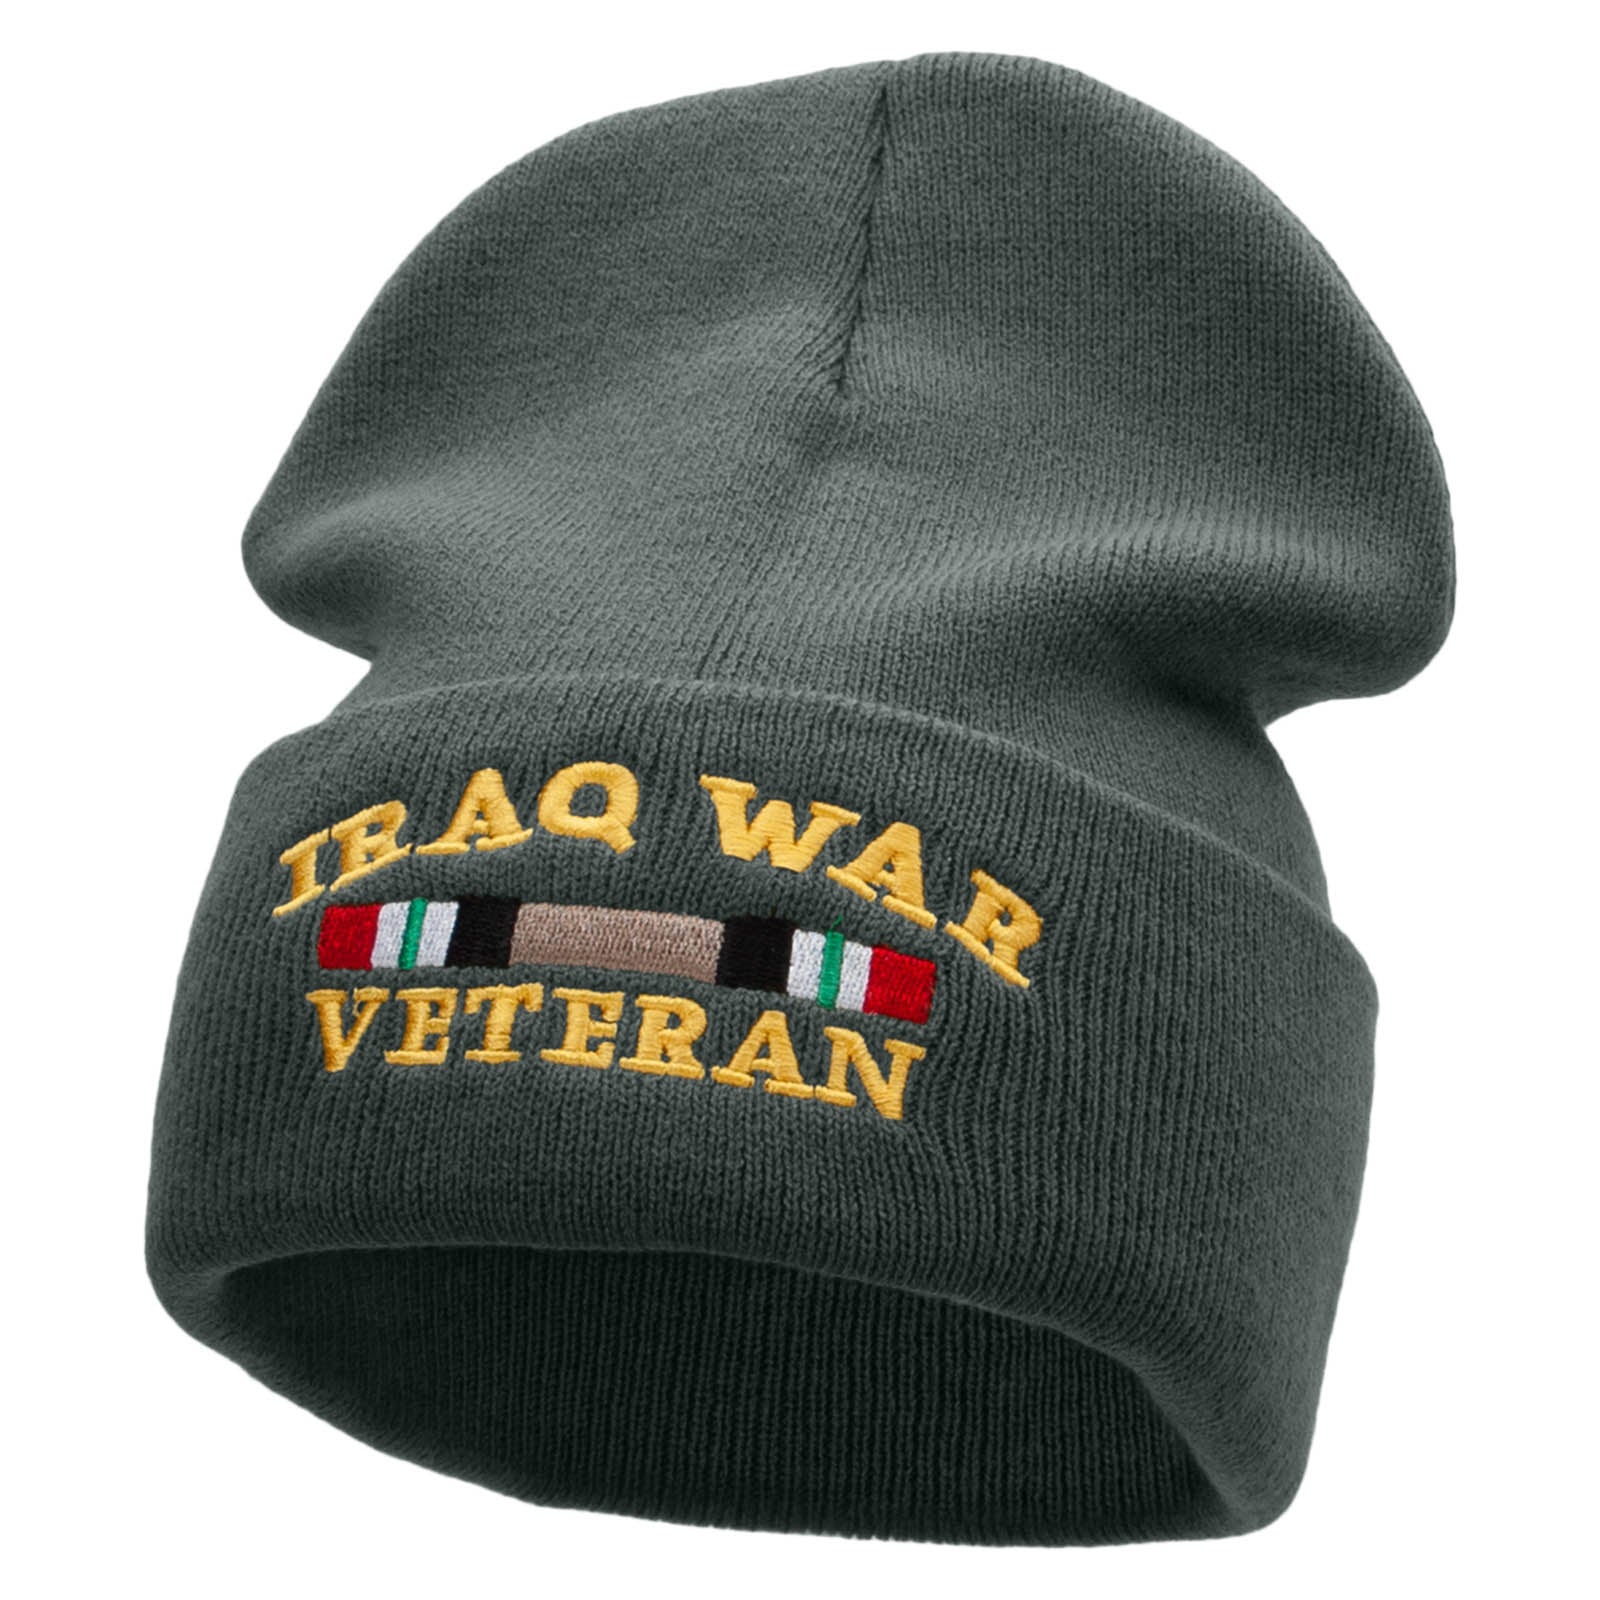 Iraq War Ribbon Embroidered 12 Inch Solid Knit Cuff Long Beanie Made in USA - Graphite OSFM